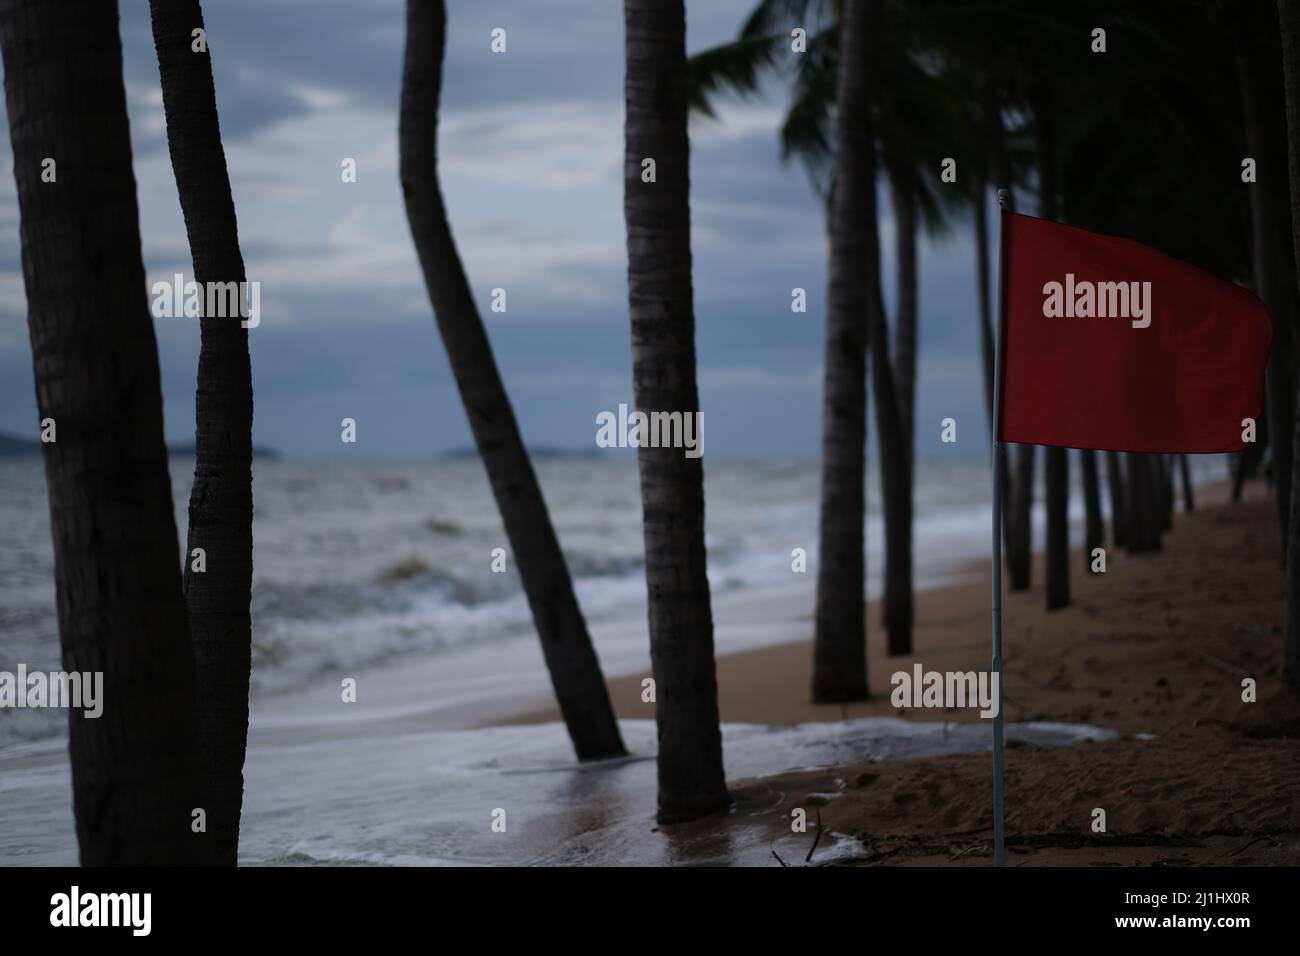 Warning: rough sea! Red flag is fluttering among a palm trees, with heavy waves under grey sky behind them Stock Photo